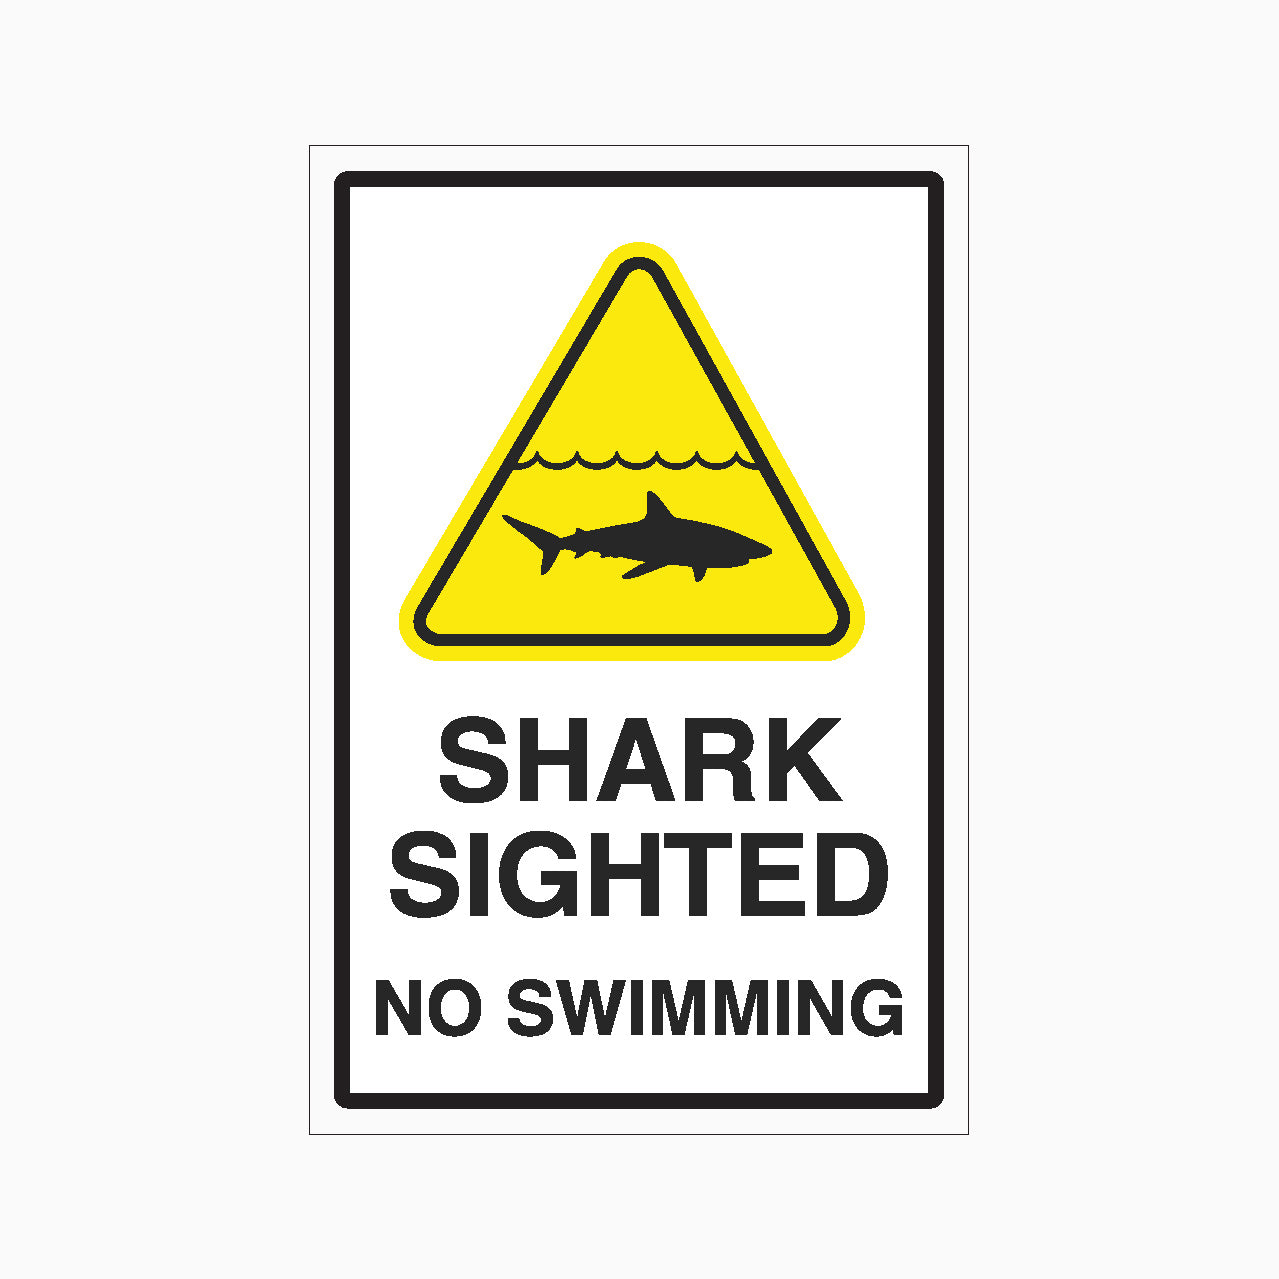 SHARK SIGHTED - NO SWIMMING SIGN – Get signs